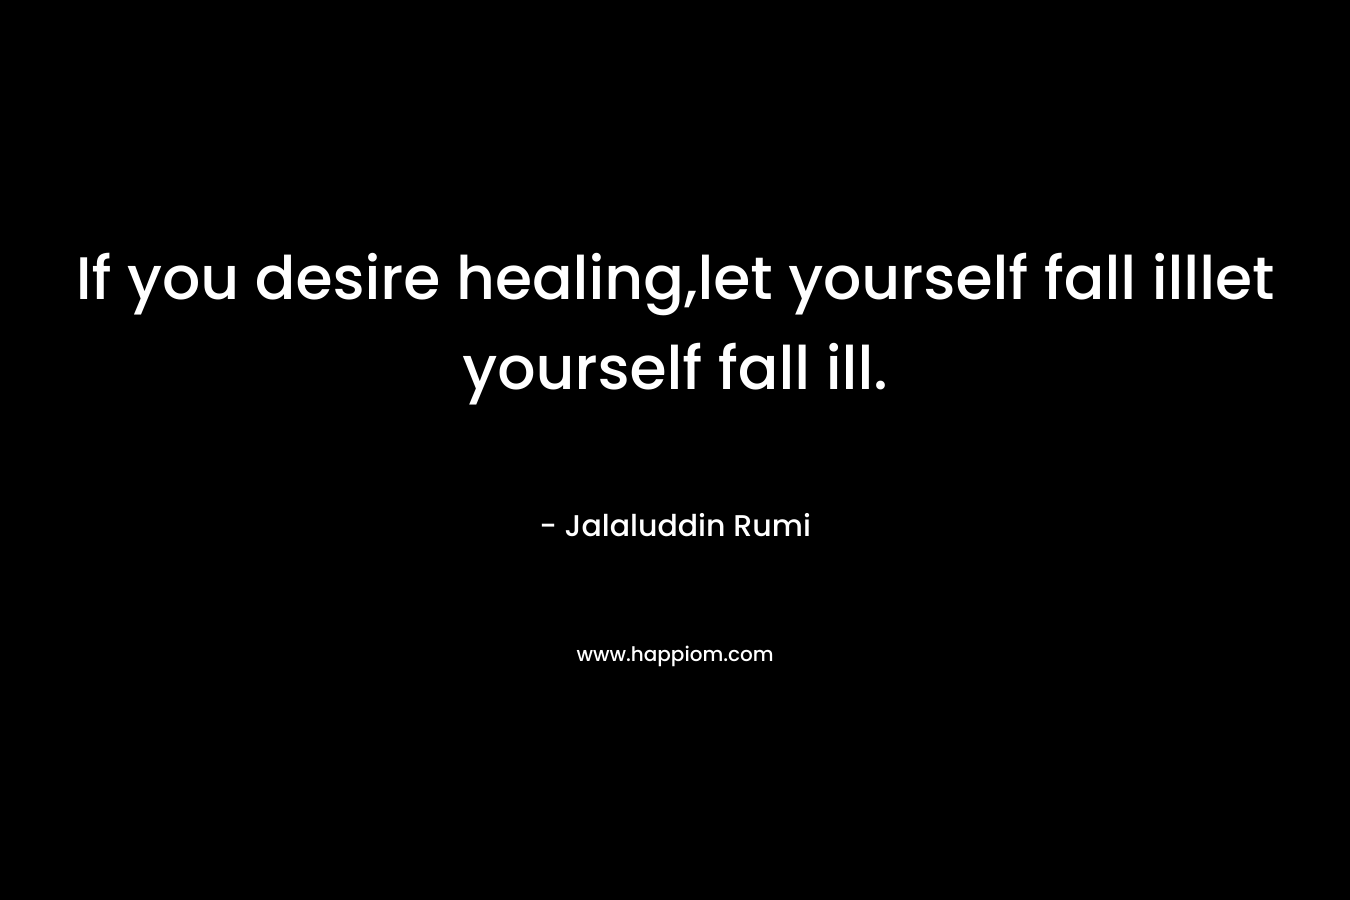 If you desire healing,let yourself fall illlet yourself fall ill.